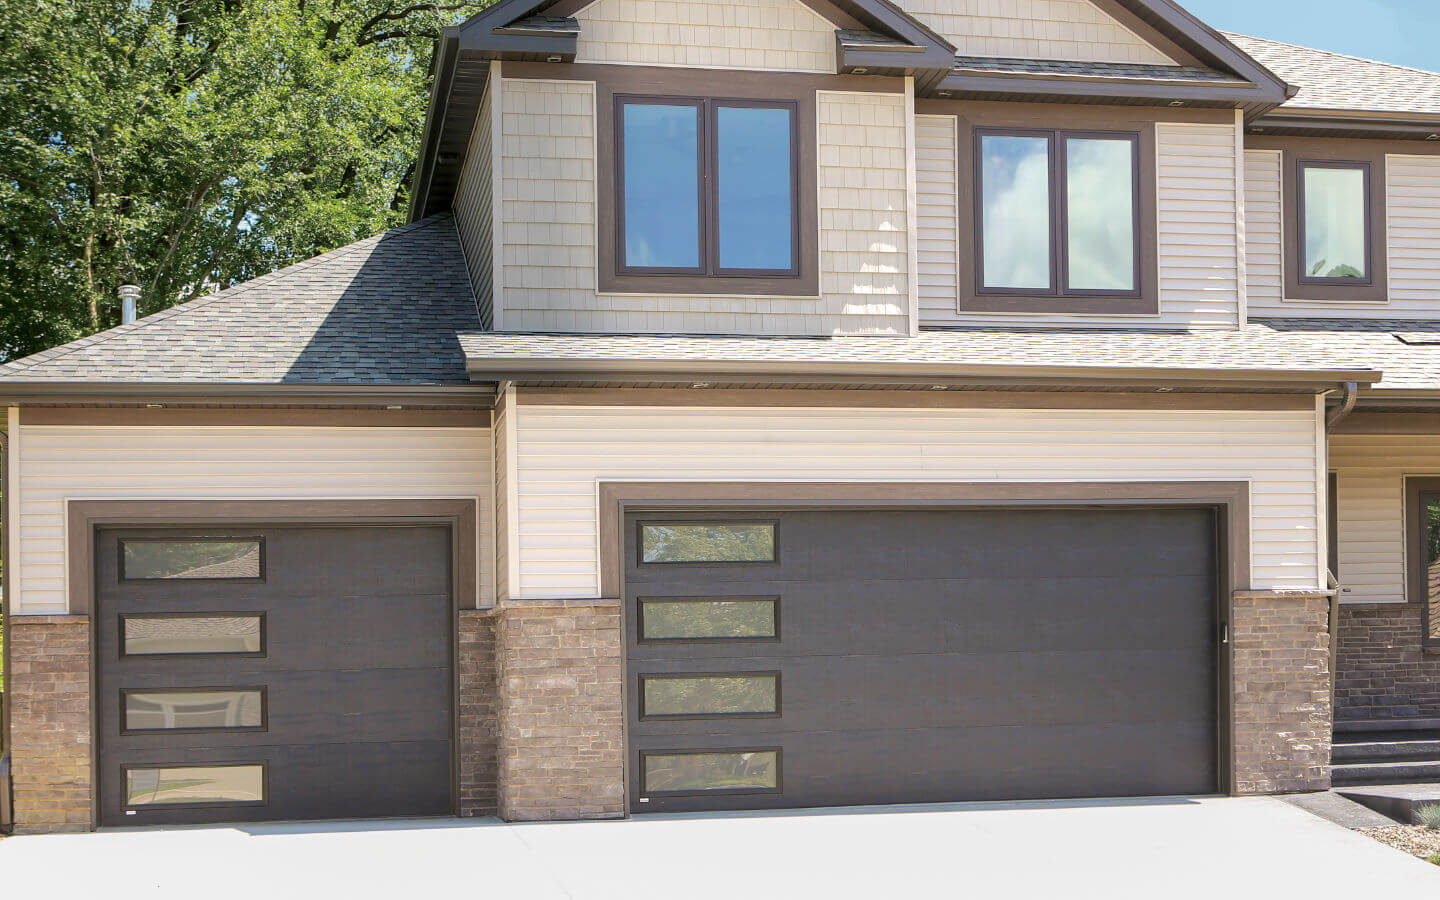 new carriage style garage doors on house in kalispell